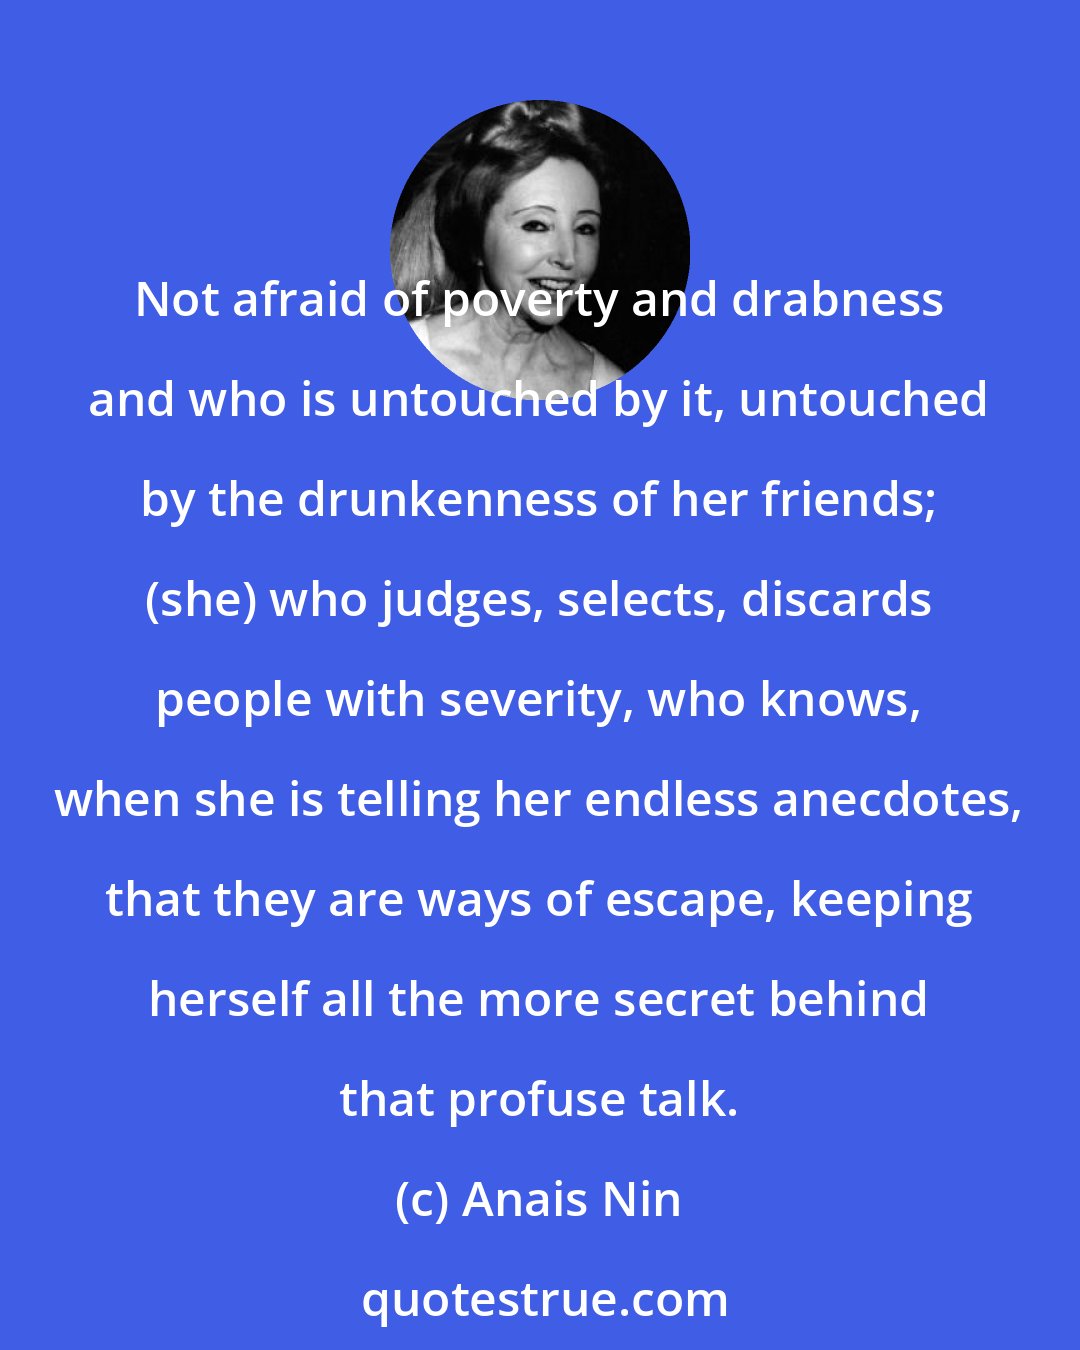 Anais Nin: Not afraid of poverty and drabness and who is untouched by it, untouched by the drunkenness of her friends; (she) who judges, selects, discards people with severity, who knows, when she is telling her endless anecdotes, that they are ways of escape, keeping herself all the more secret behind that profuse talk.